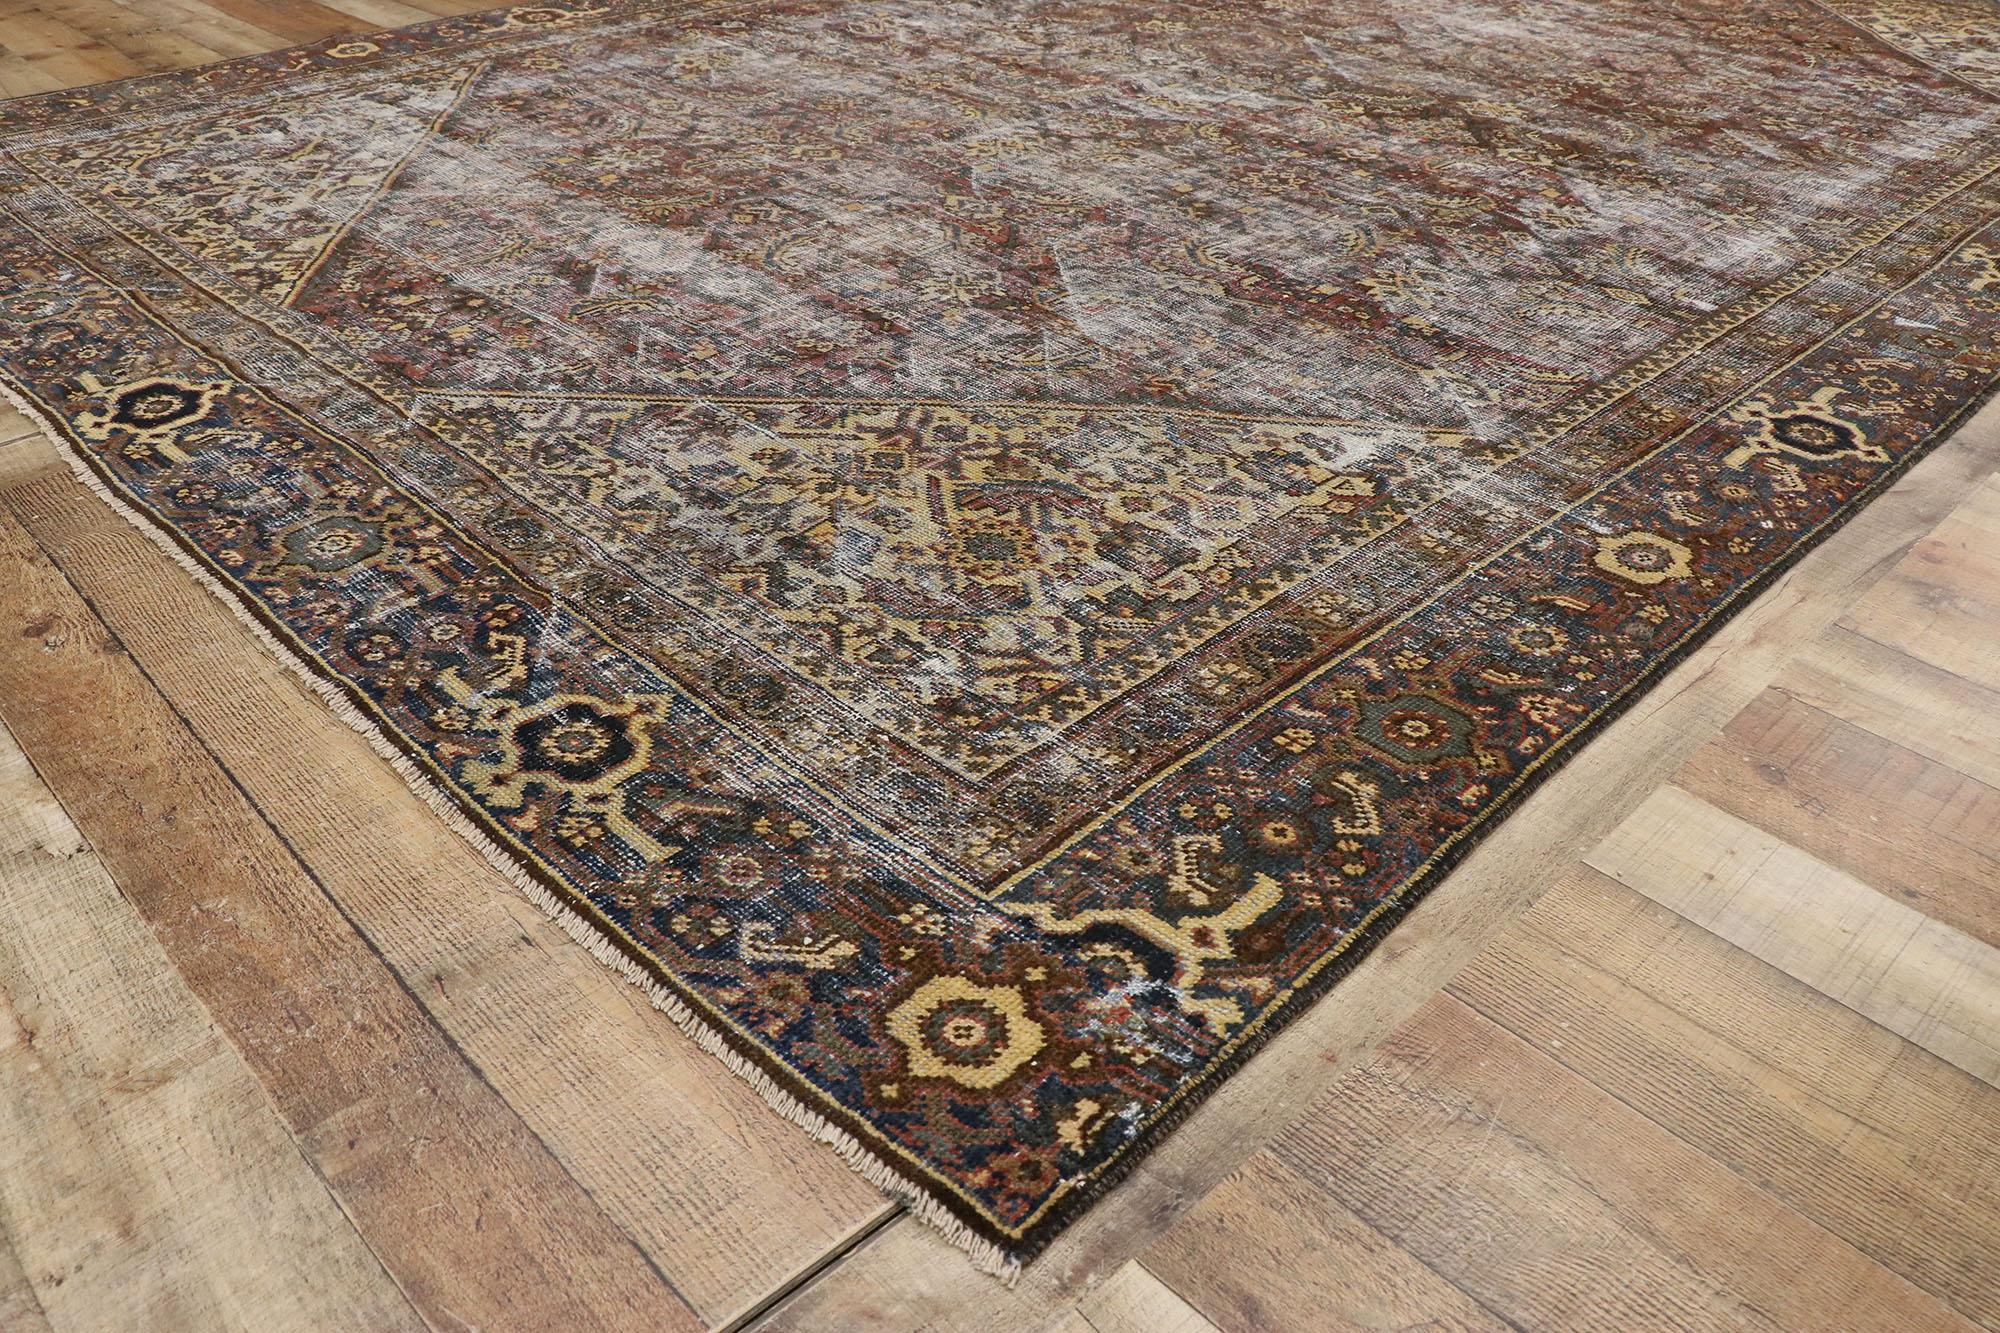  Distressed Antique Persian Mahal Rug with Traditional English Rustic Style  2